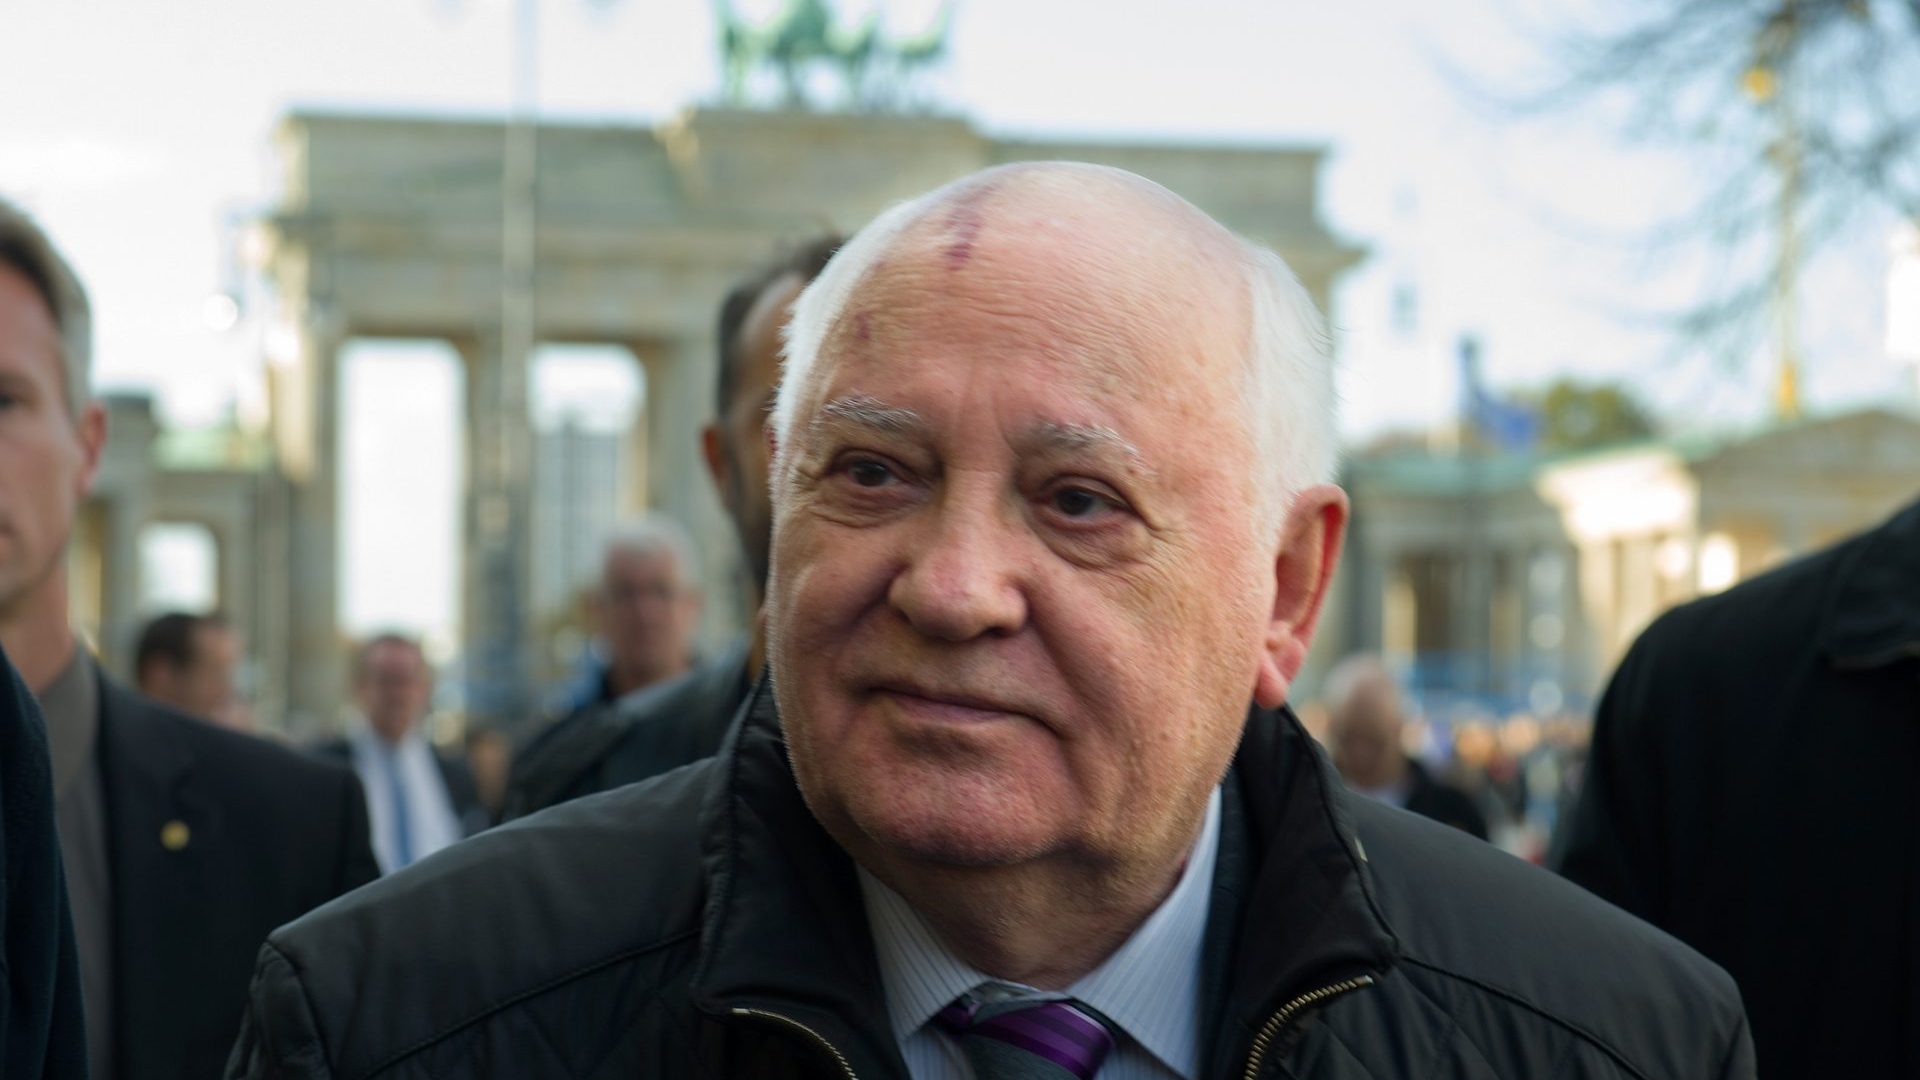 Former soviet leader Mikhail Gorbatchev walks across the Pariser Platz near the Brandenburg Gate on the eve of the 25th anniversary of the fall of the Berlin Wall. Photo: Target Presse Agentur Gmbh/Getty Images